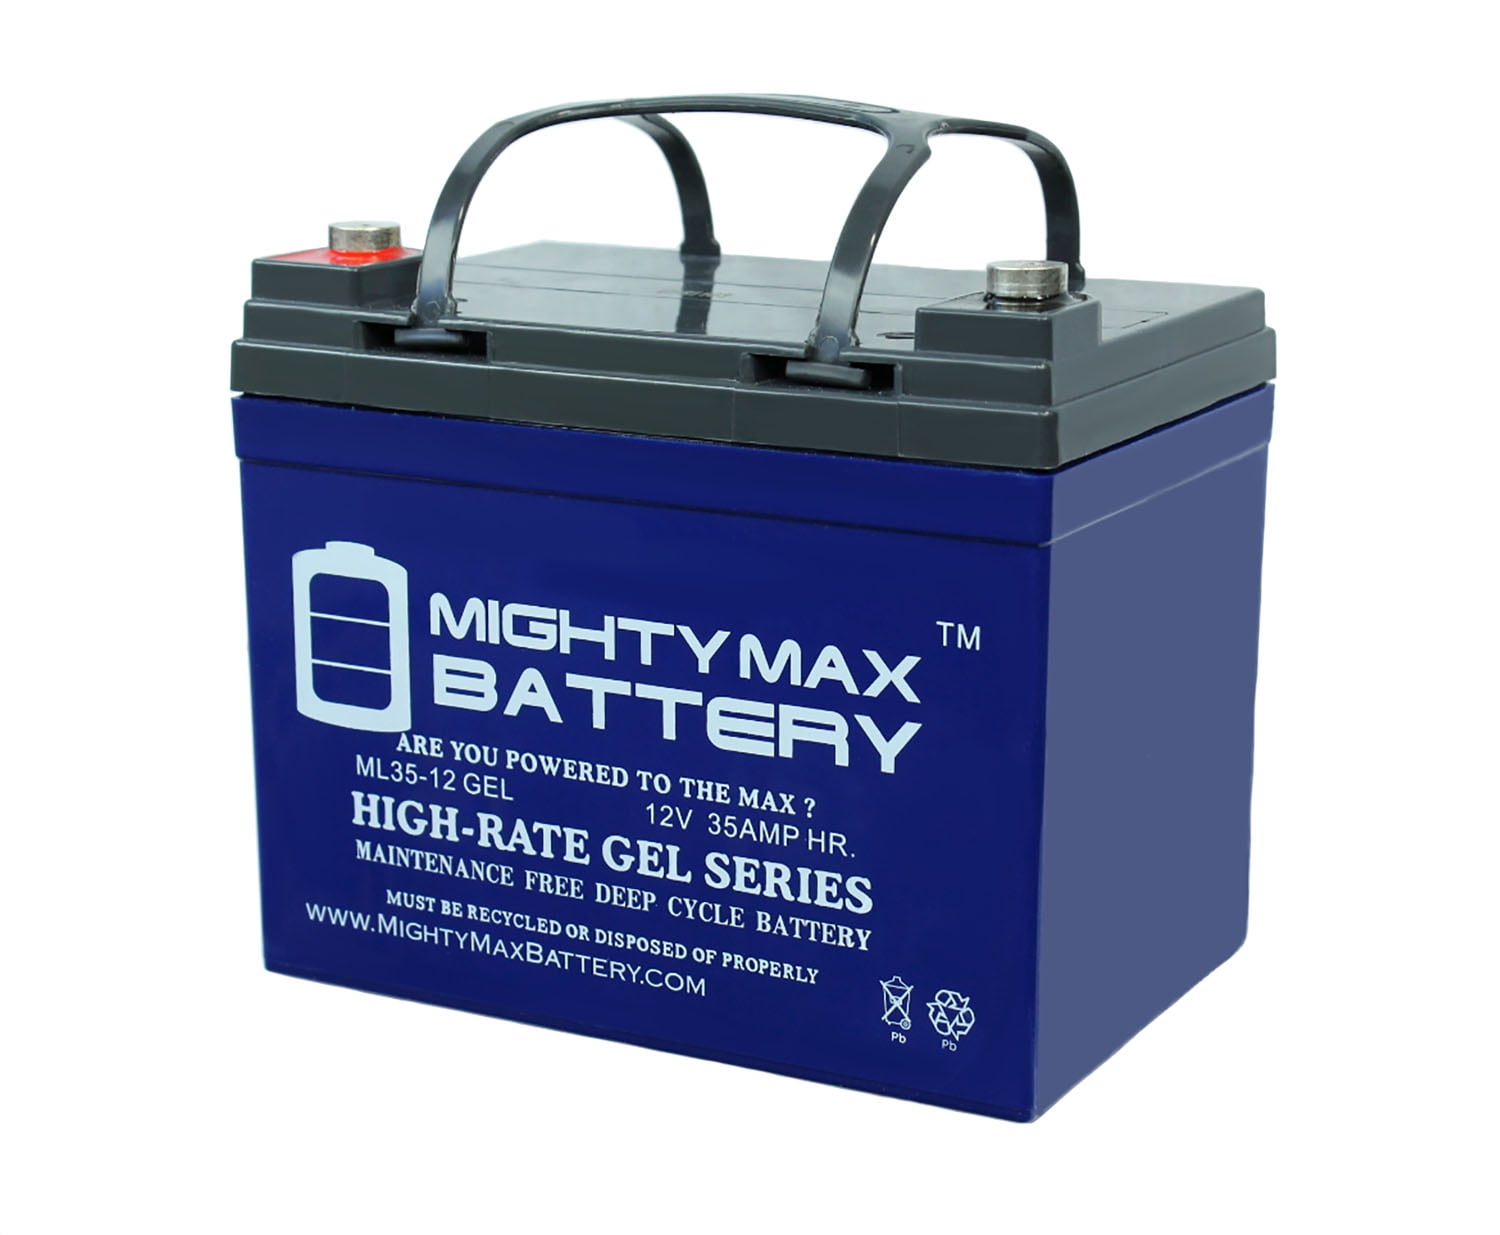 Mighty Max Battery 12V 35AH Gel Replacement Battery for Tripp Lite Smart 2200RMXL UPS 2 Pack Brand Product